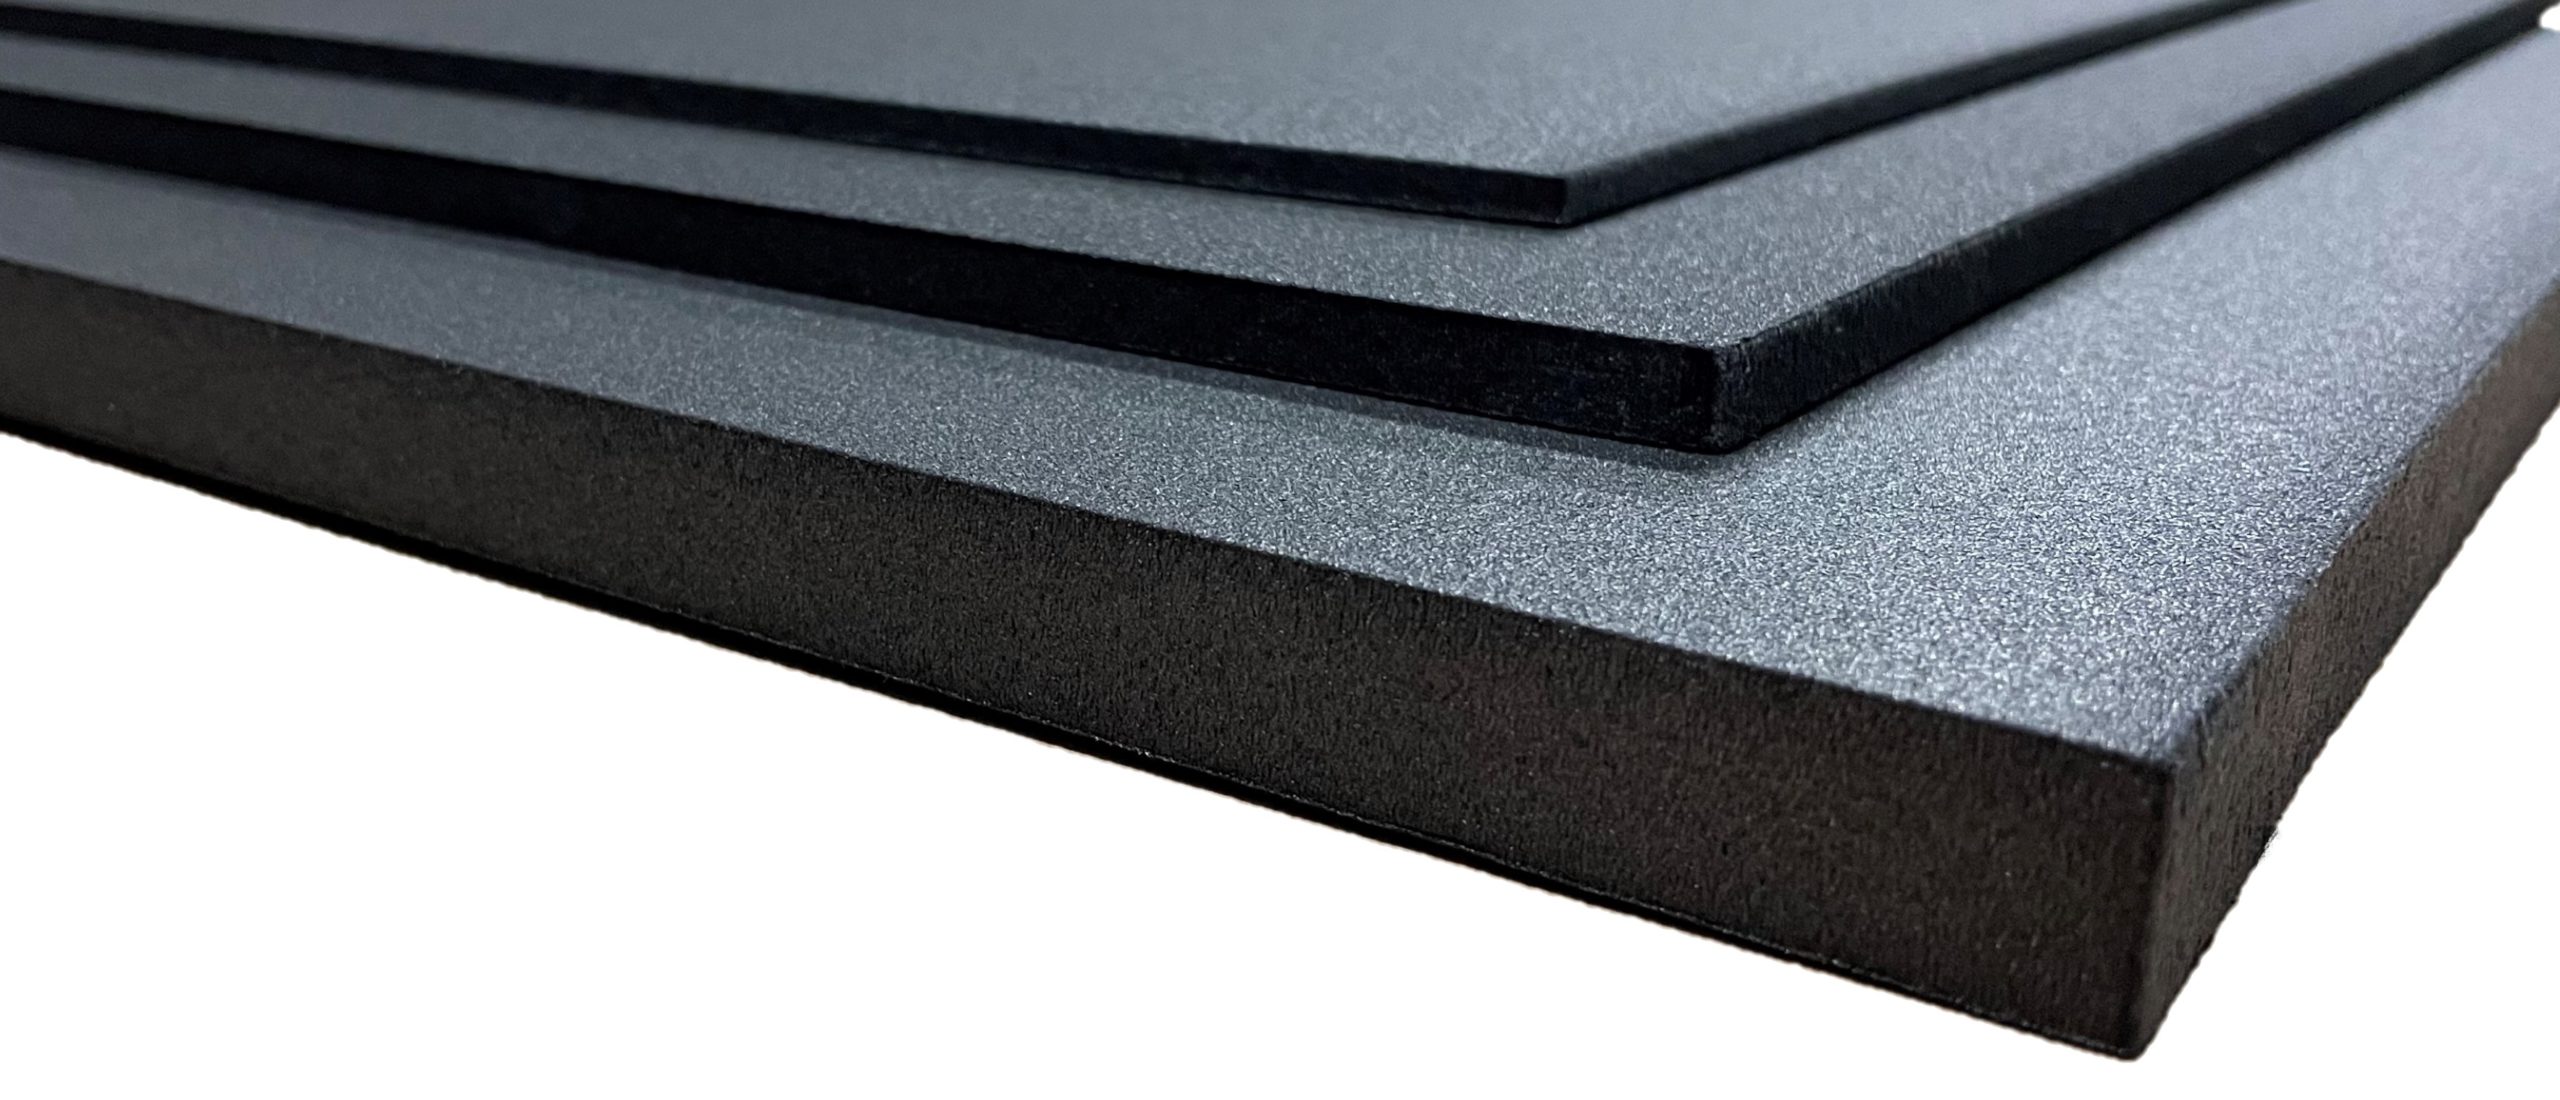 Need XPS Foam Fast: Find Affordable Insulation Near You